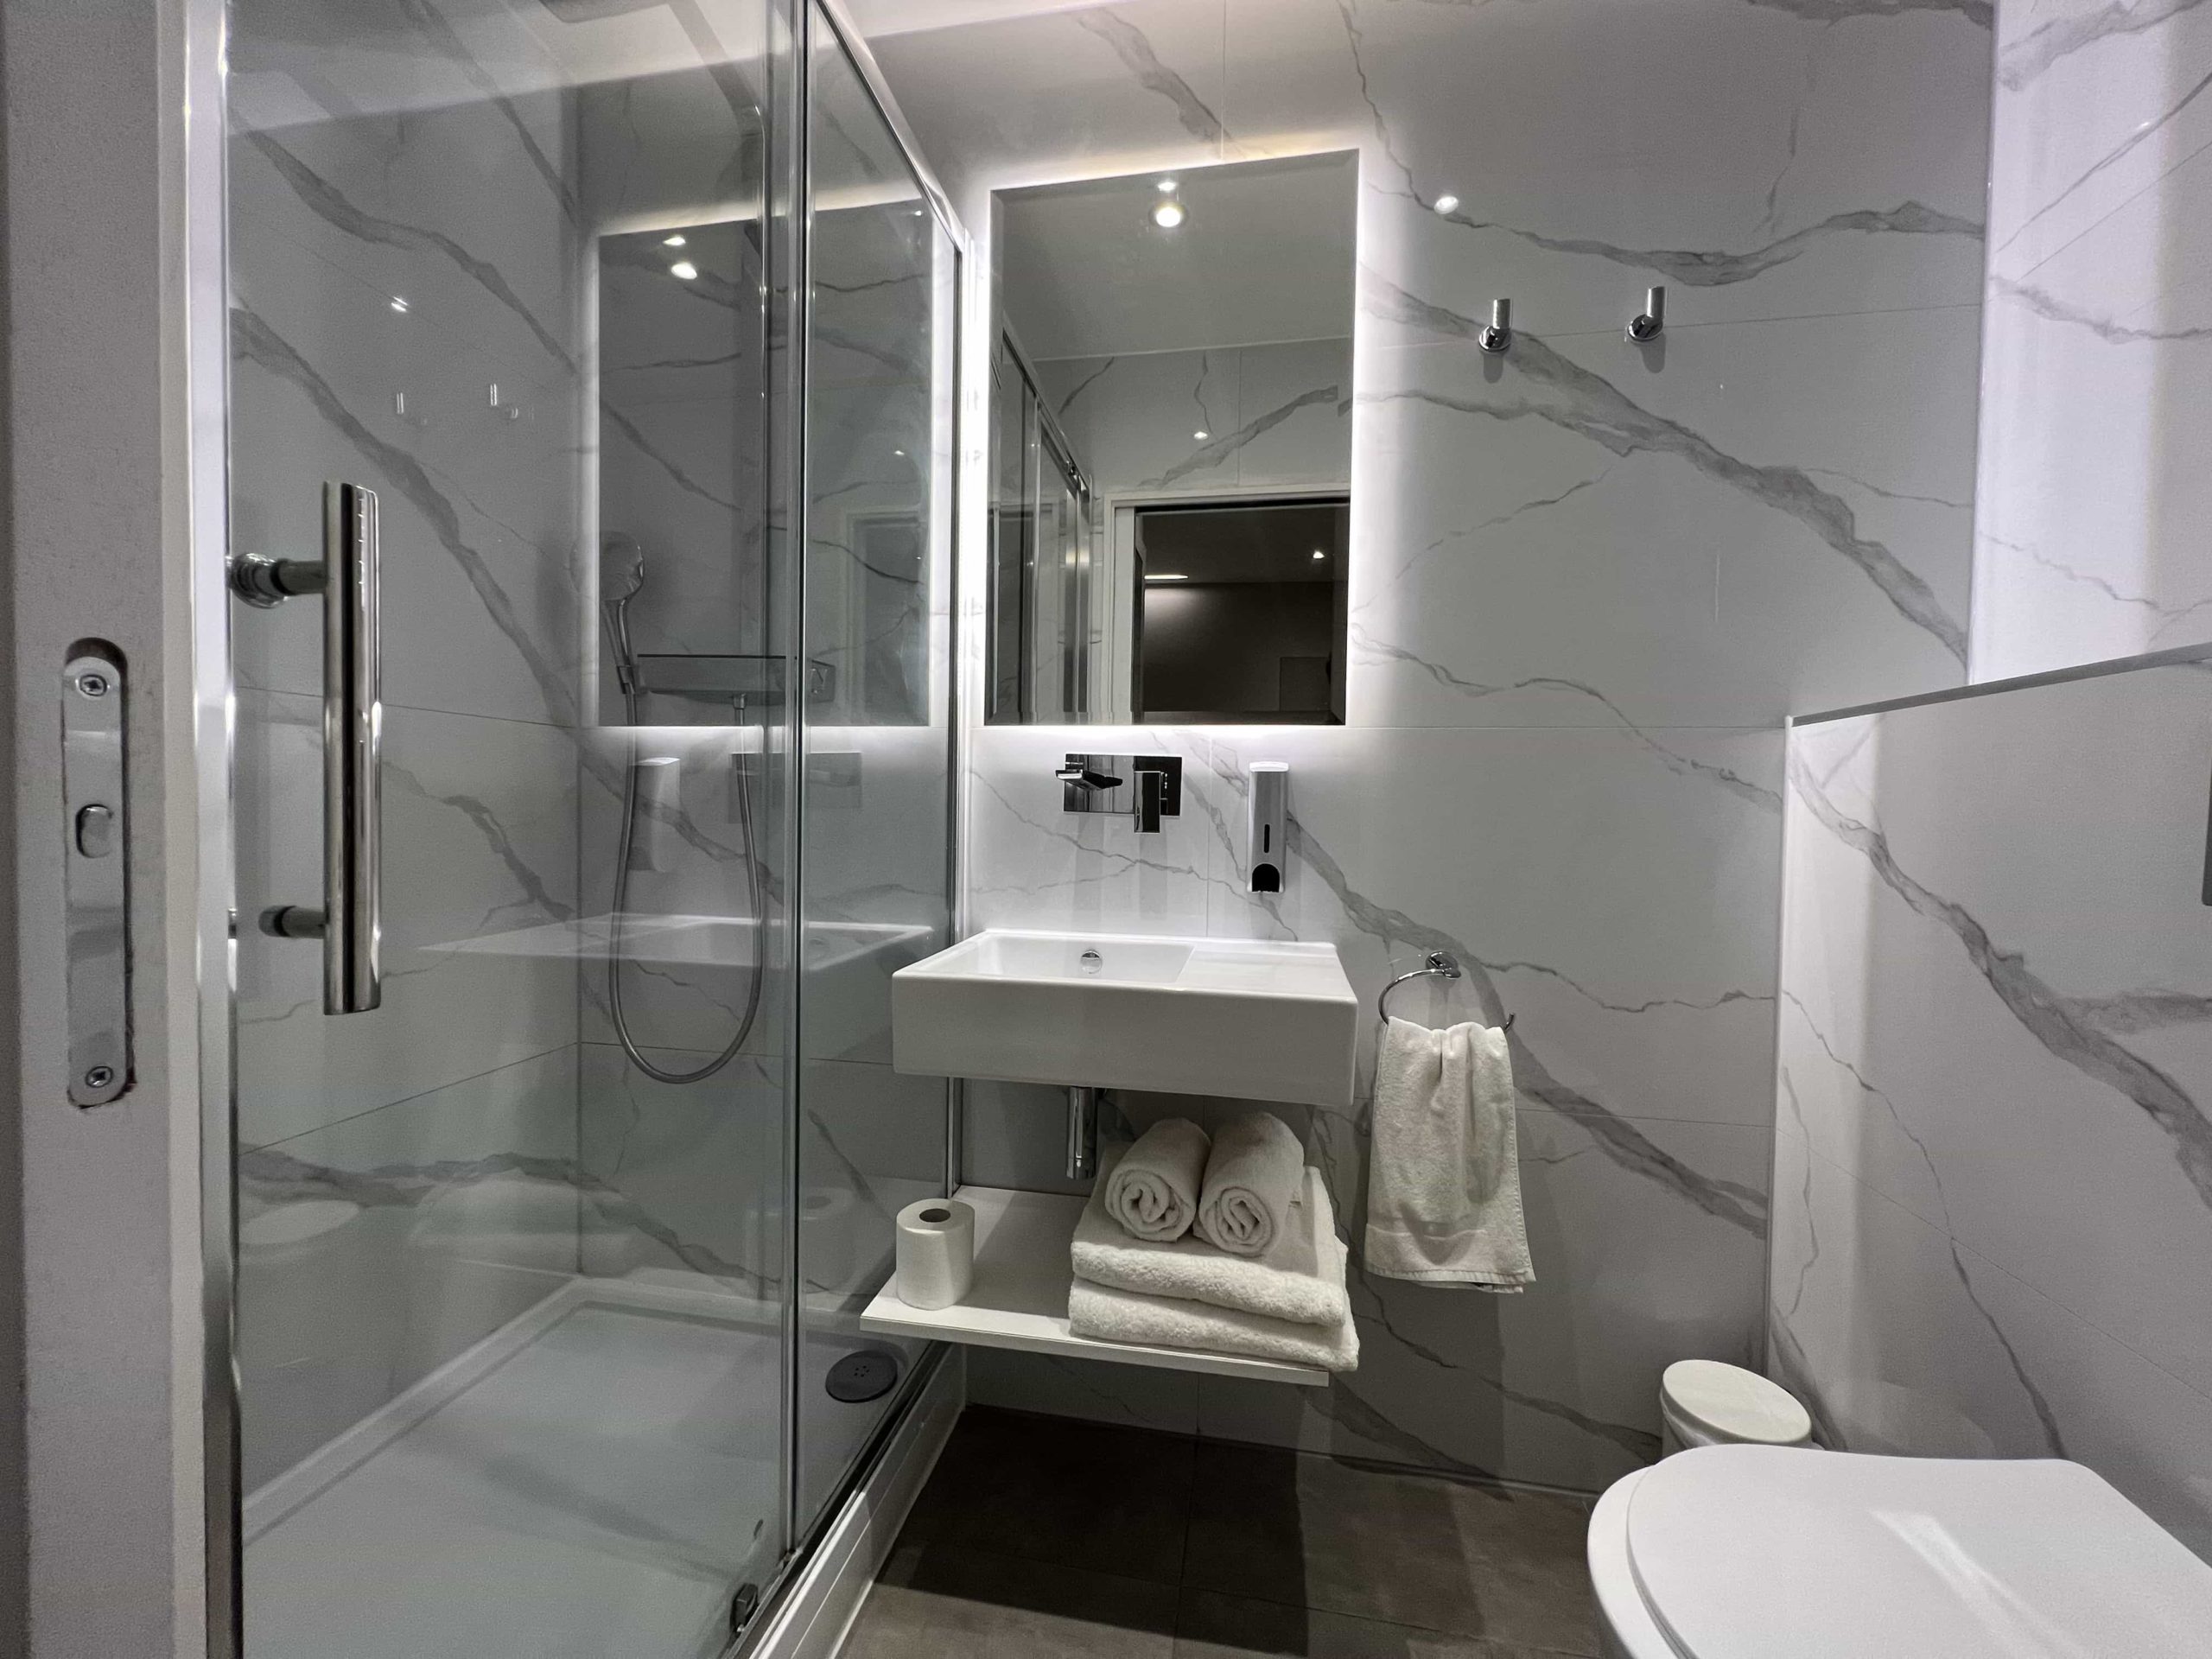 A brightly-lit bathroom with a walk-in shower, decorated with marble-effect tiles